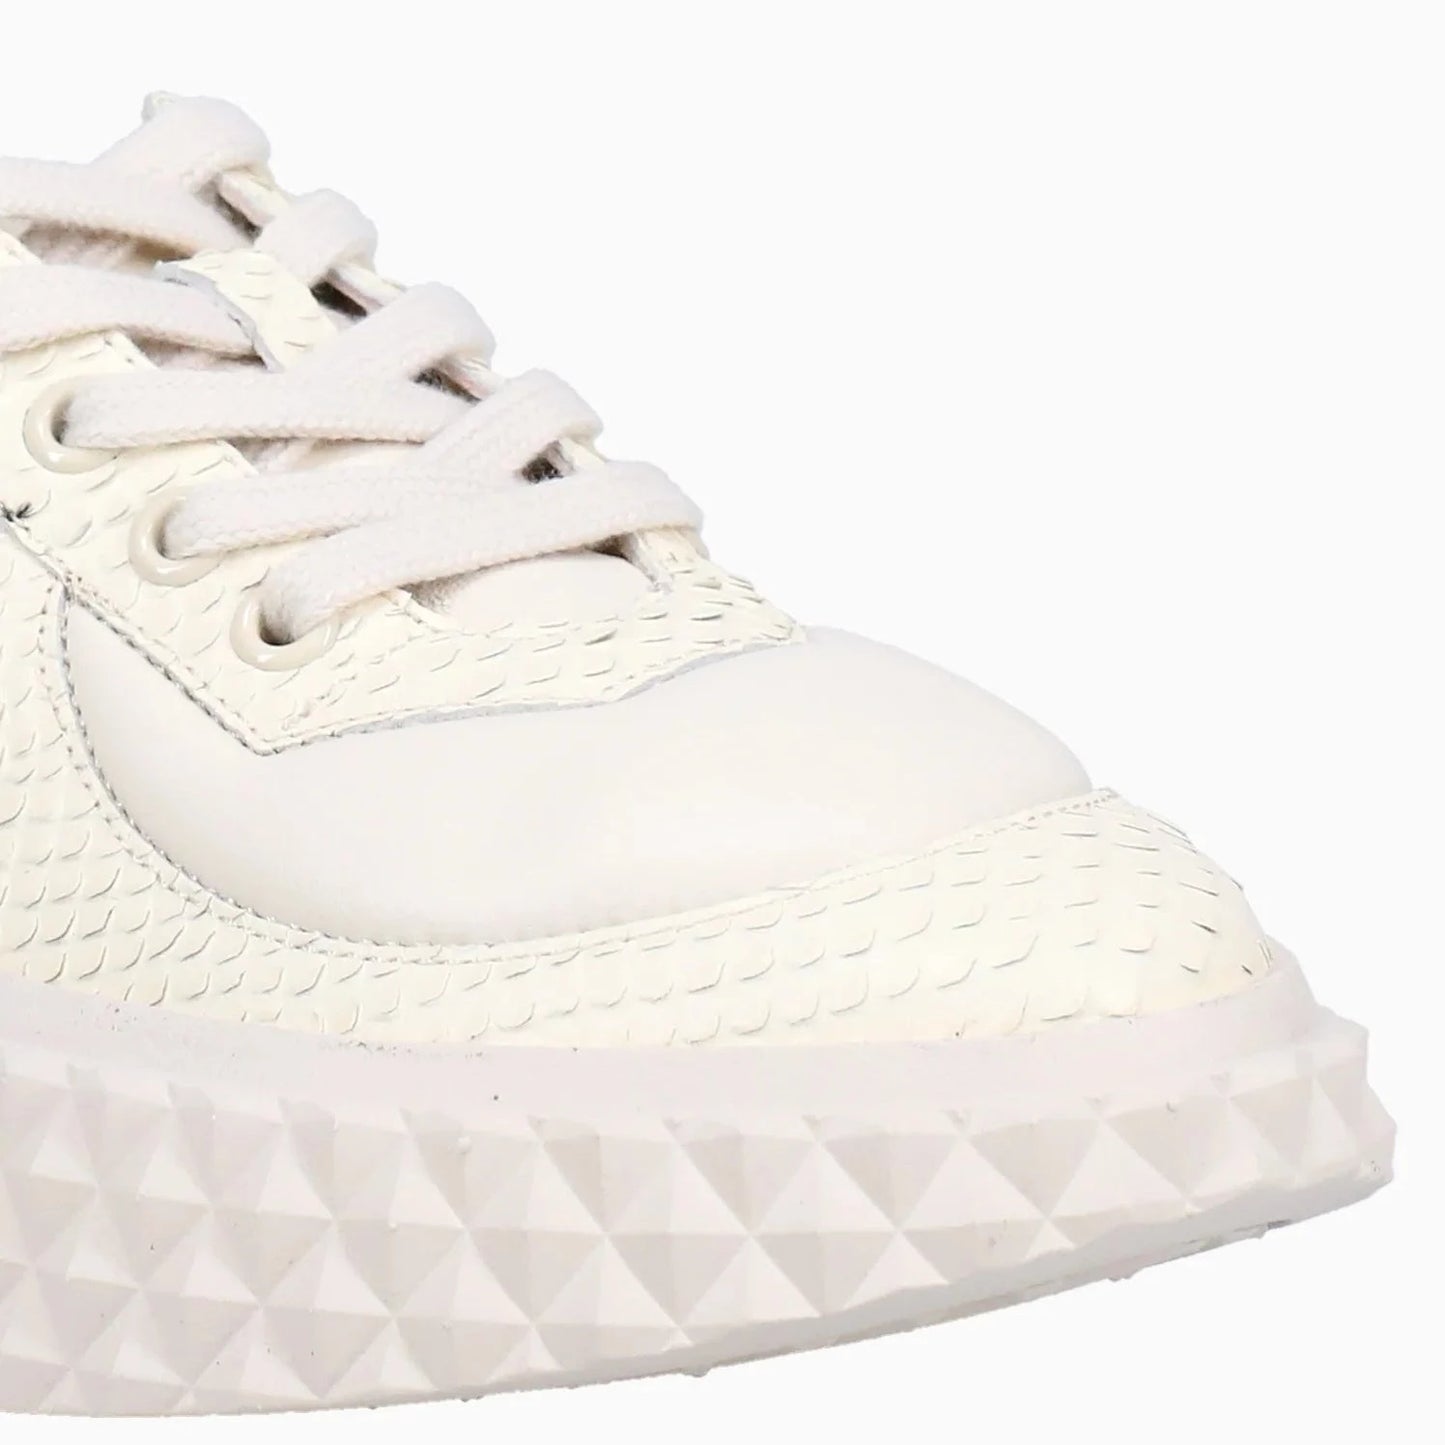 4CCCCEES | SNEAKERS MUJER | BILLOW SUN IVORY | BLANCO